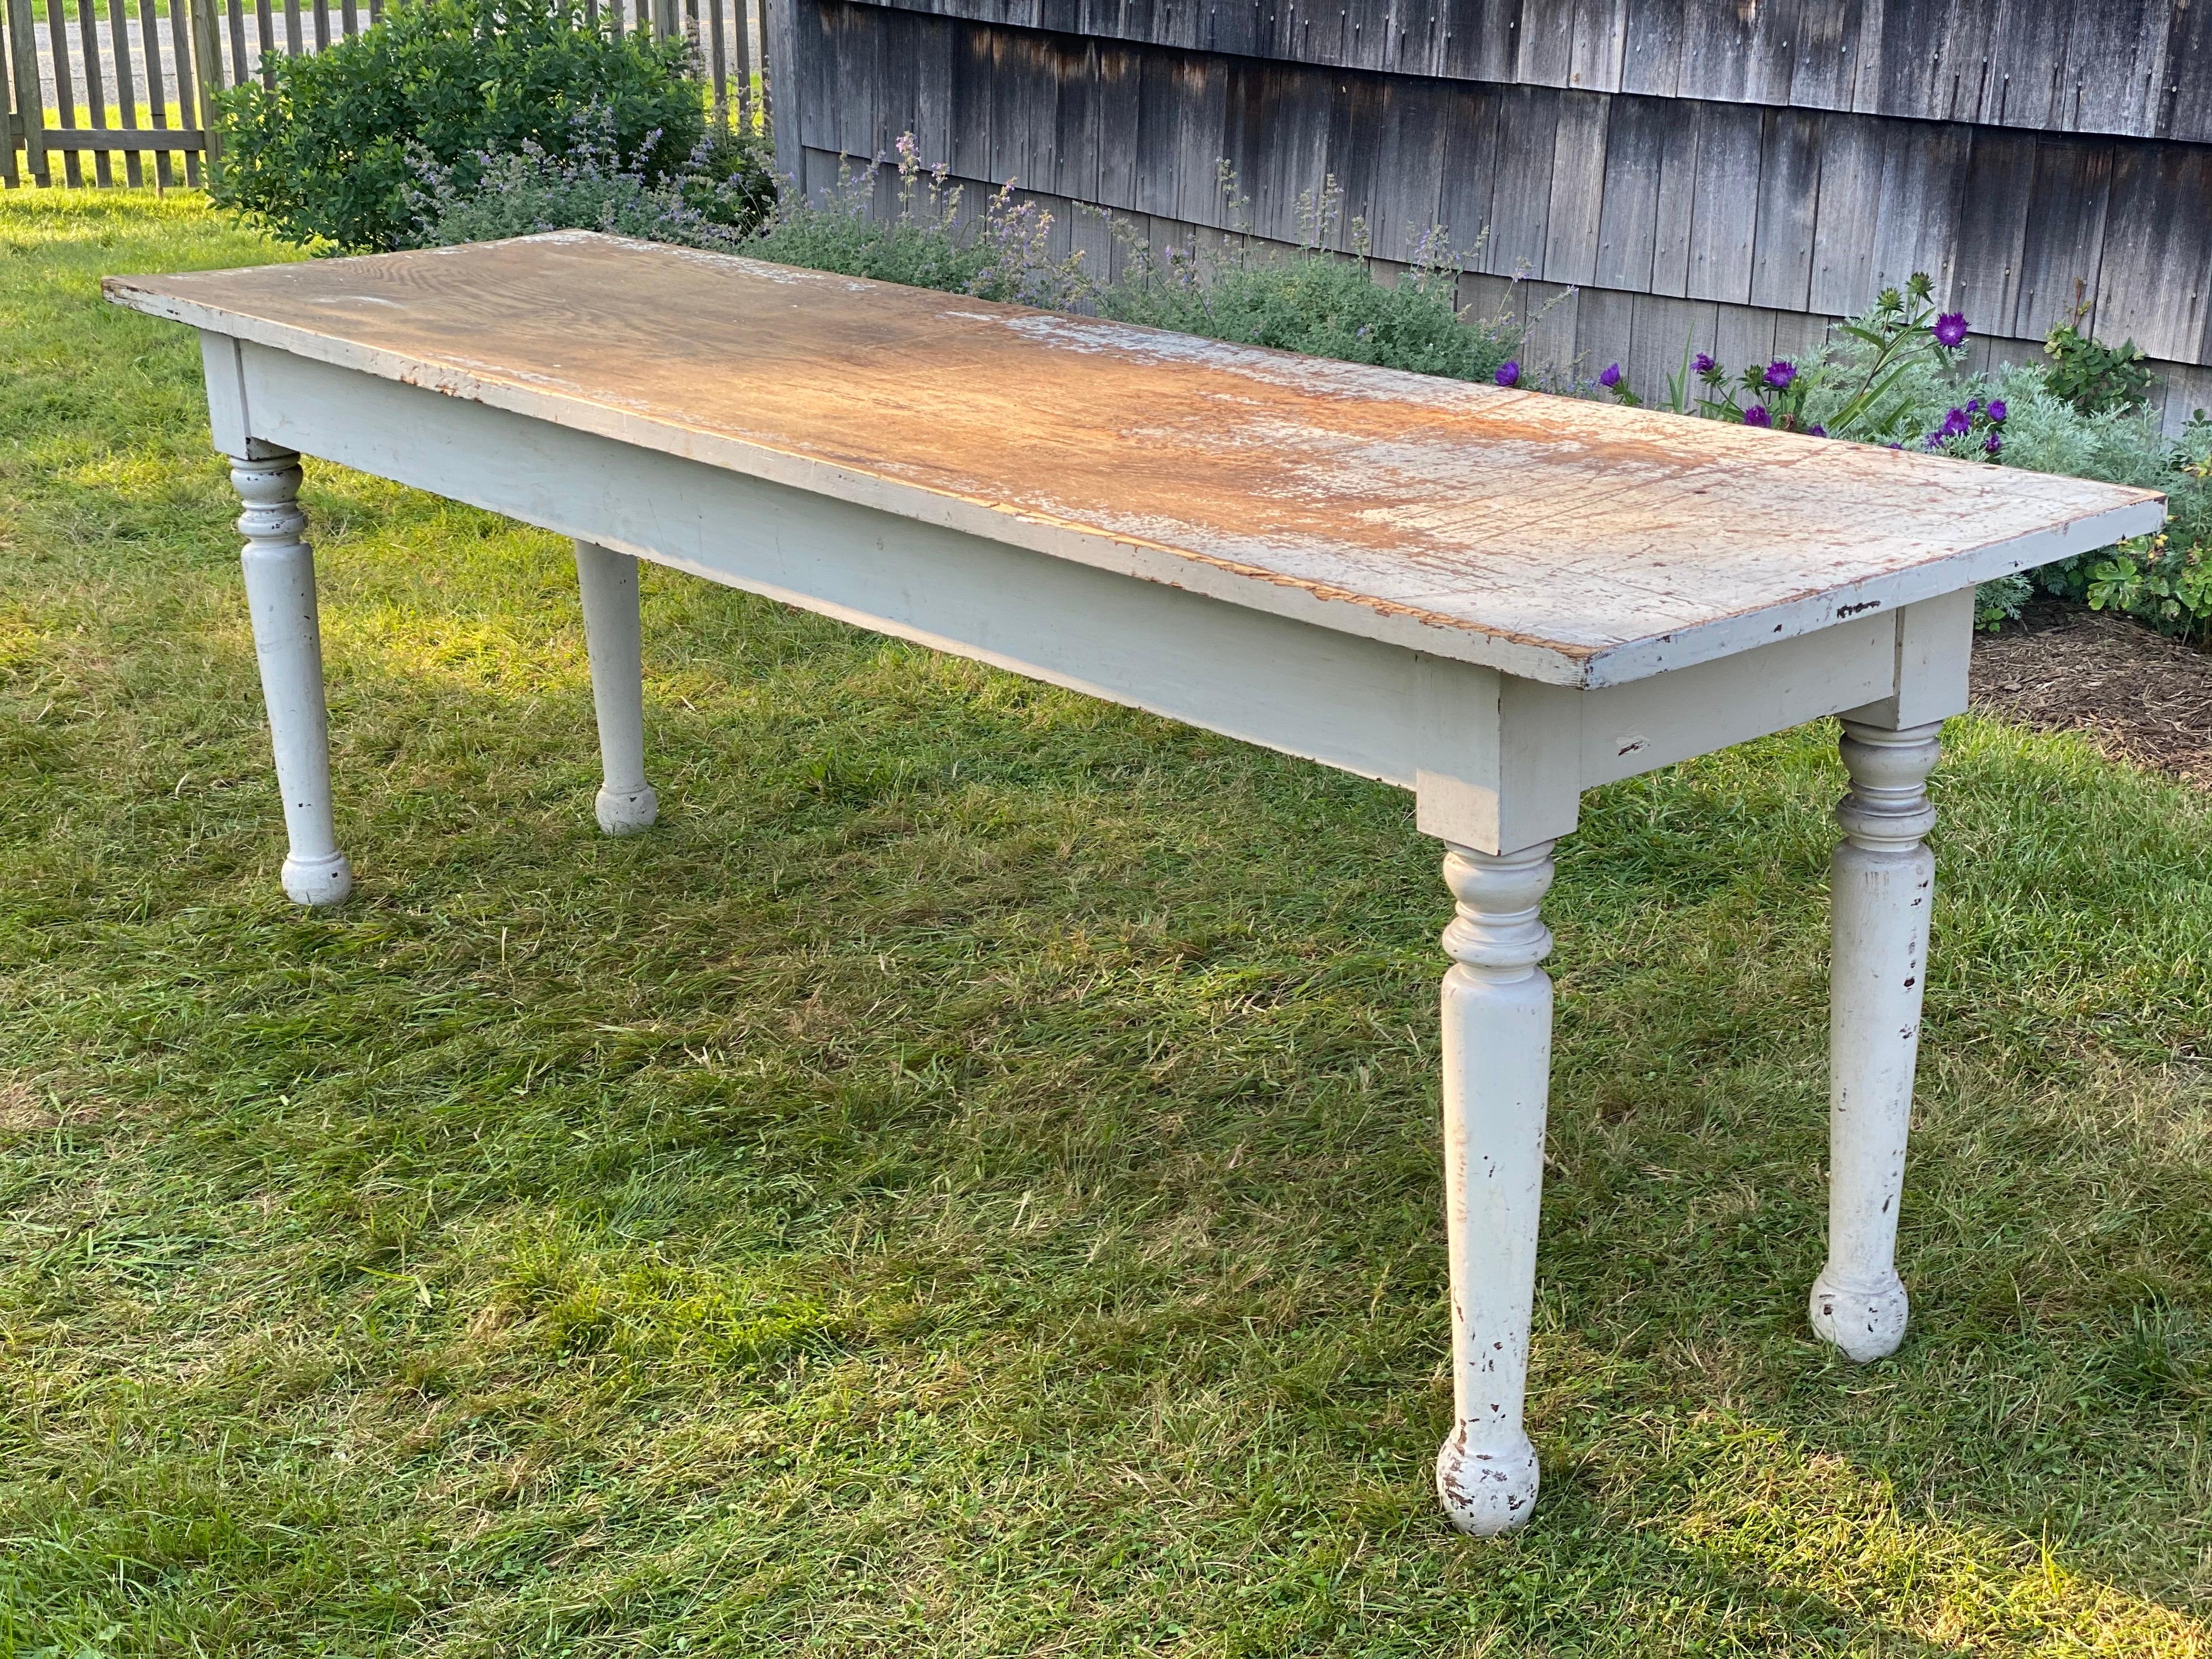 Rustic white painted long narrow farm table, 20th Century
Turned legs and a rustic worn top. This table has a great look and patina. White paint is mainly worn from the top but also expected wear on legs as well. Good stable condition.

Measures: